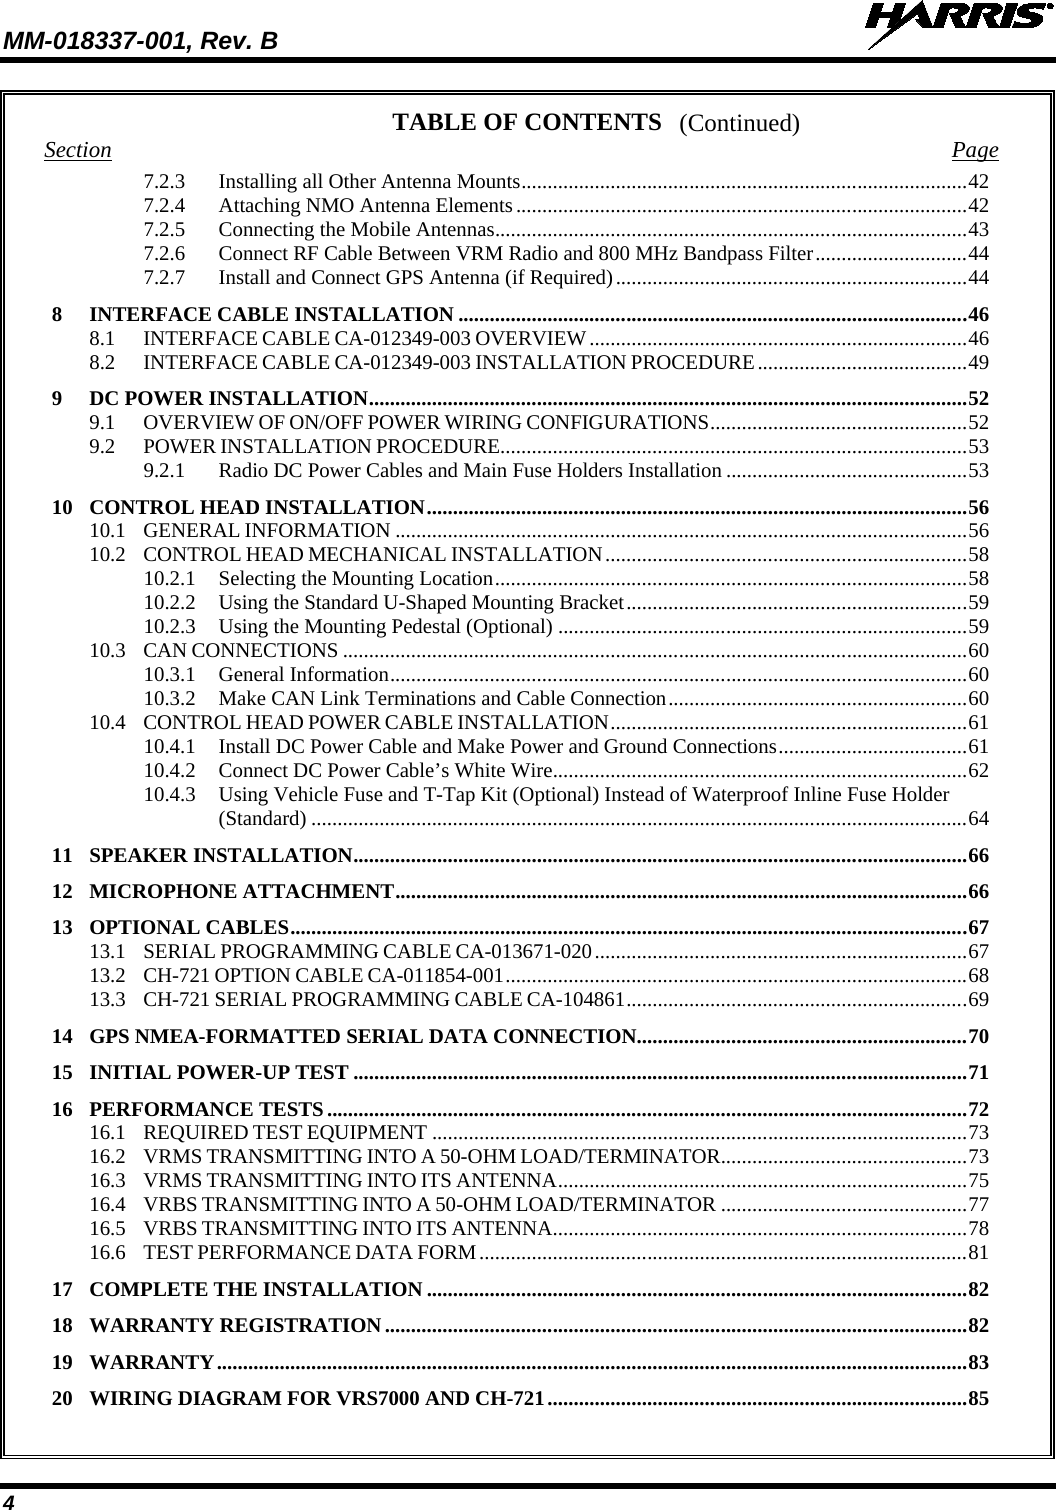 MM-018337-001, Rev. B   4 (Continued) TABLE OF CONTENTS Section Page 7.2.3 Installing all Other Antenna Mounts ..................................................................................... 42 7.2.4 Attaching NMO Antenna Elements ...................................................................................... 42 7.2.5 Connecting the Mobile Antennas .......................................................................................... 43 7.2.6 Connect RF Cable Between VRM Radio and 800 MHz Bandpass Filter ............................. 44 7.2.7 Install and Connect GPS Antenna (if Required) ................................................................... 44 8 INTERFACE CABLE INSTALLATION ................................................................................................. 46 8.1 INTERFACE CABLE CA-012349-003 OVERVIEW ........................................................................ 46 8.2 INTERFACE CABLE CA-012349-003 INSTALLATION PROCEDURE ........................................ 49 9 DC POWER INSTALLATION .................................................................................................................. 52 9.1 OVERVIEW OF ON/OFF POWER WIRING CONFIGURATIONS ................................................. 52 9.2 POWER INSTALLATION PROCEDURE ......................................................................................... 53 9.2.1 Radio DC Power Cables and Main Fuse Holders Installation .............................................. 53 10 CONTROL HEAD INSTALLATION ....................................................................................................... 56 10.1 GENERAL INFORMATION ............................................................................................................. 56 10.2 CONTROL HEAD MECHANICAL INSTALLATION ..................................................................... 58 10.2.1 Selecting the Mounting Location .......................................................................................... 58 10.2.2 Using the Standard U-Shaped Mounting Bracket ................................................................. 59 10.2.3 Using the Mounting Pedestal (Optional) .............................................................................. 59 10.3 CAN CONNECTIONS ....................................................................................................................... 60 10.3.1 General Information .............................................................................................................. 60 10.3.2 Make CAN Link Terminations and Cable Connection ......................................................... 60 10.4 CONTROL HEAD POWER CABLE INSTALLATION .................................................................... 61 10.4.1 Install DC Power Cable and Make Power and Ground Connections .................................... 61 10.4.2 Connect DC Power Cable’s White Wire ............................................................................... 62 10.4.3 Using Vehicle Fuse and T-Tap Kit (Optional) Instead of Waterproof Inline Fuse Holder (Standard) ............................................................................................................................. 64 11 SPEAKER INSTALLATION ..................................................................................................................... 66 12 MICROPHONE ATTACHMENT ............................................................................................................. 66 13 OPTIONAL CABLES ................................................................................................................................. 67 13.1 SERIAL PROGRAMMING CABLE CA-013671-020 ....................................................................... 67 13.2 CH-721 OPTION CABLE CA-011854-001 ........................................................................................ 68 13.3 CH-721 SERIAL PROGRAMMING CABLE CA-104861 ................................................................. 69 14 GPS NMEA-FORMATTED SERIAL DATA CONNECTION ............................................................... 70 15 INITIAL POWER-UP TEST ..................................................................................................................... 71 16 PERFORMANCE TESTS .......................................................................................................................... 72 16.1 REQUIRED TEST EQUIPMENT ...................................................................................................... 73 16.2 VRMS TRANSMITTING INTO A 50-OHM LOAD/TERMINATOR ............................................... 73 16.3 VRMS TRANSMITTING INTO ITS ANTENNA .............................................................................. 75 16.4 VRBS TRANSMITTING INTO A 50-OHM LOAD/TERMINATOR ............................................... 77 16.5 VRBS TRANSMITTING INTO ITS ANTENNA ............................................................................... 78 16.6 TEST PERFORMANCE DATA FORM ............................................................................................. 81 17 COMPLETE THE INSTALLATION ....................................................................................................... 82 18 WARRANTY REGISTRATION ............................................................................................................... 82 19 WARRANTY ............................................................................................................................................... 83 20 WIRING DIAGRAM FOR VRS7000 AND CH-721 ................................................................................ 85  